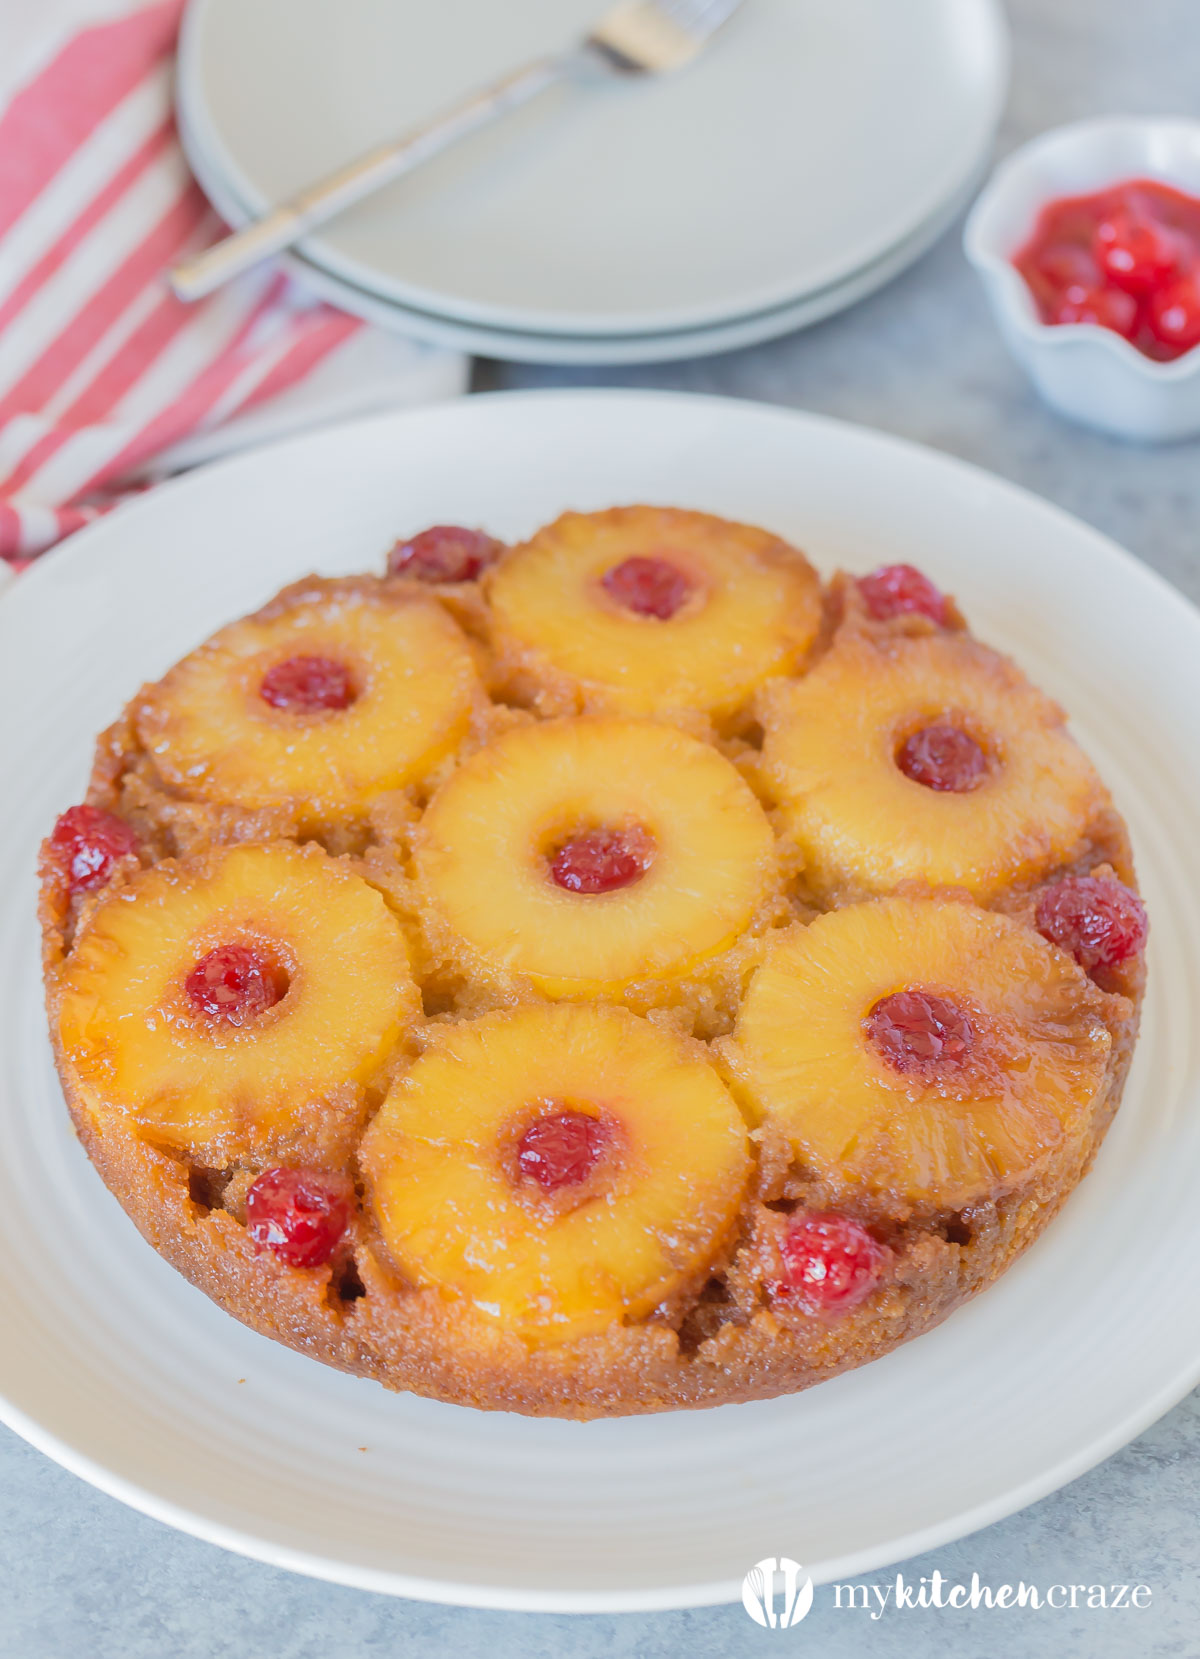 Pineapple Upside Down Cake is one of the best cakes I've ever eaten! It's moist, delicious and all homemade! No cake box needed in this recipe. This cake is screaming make me!